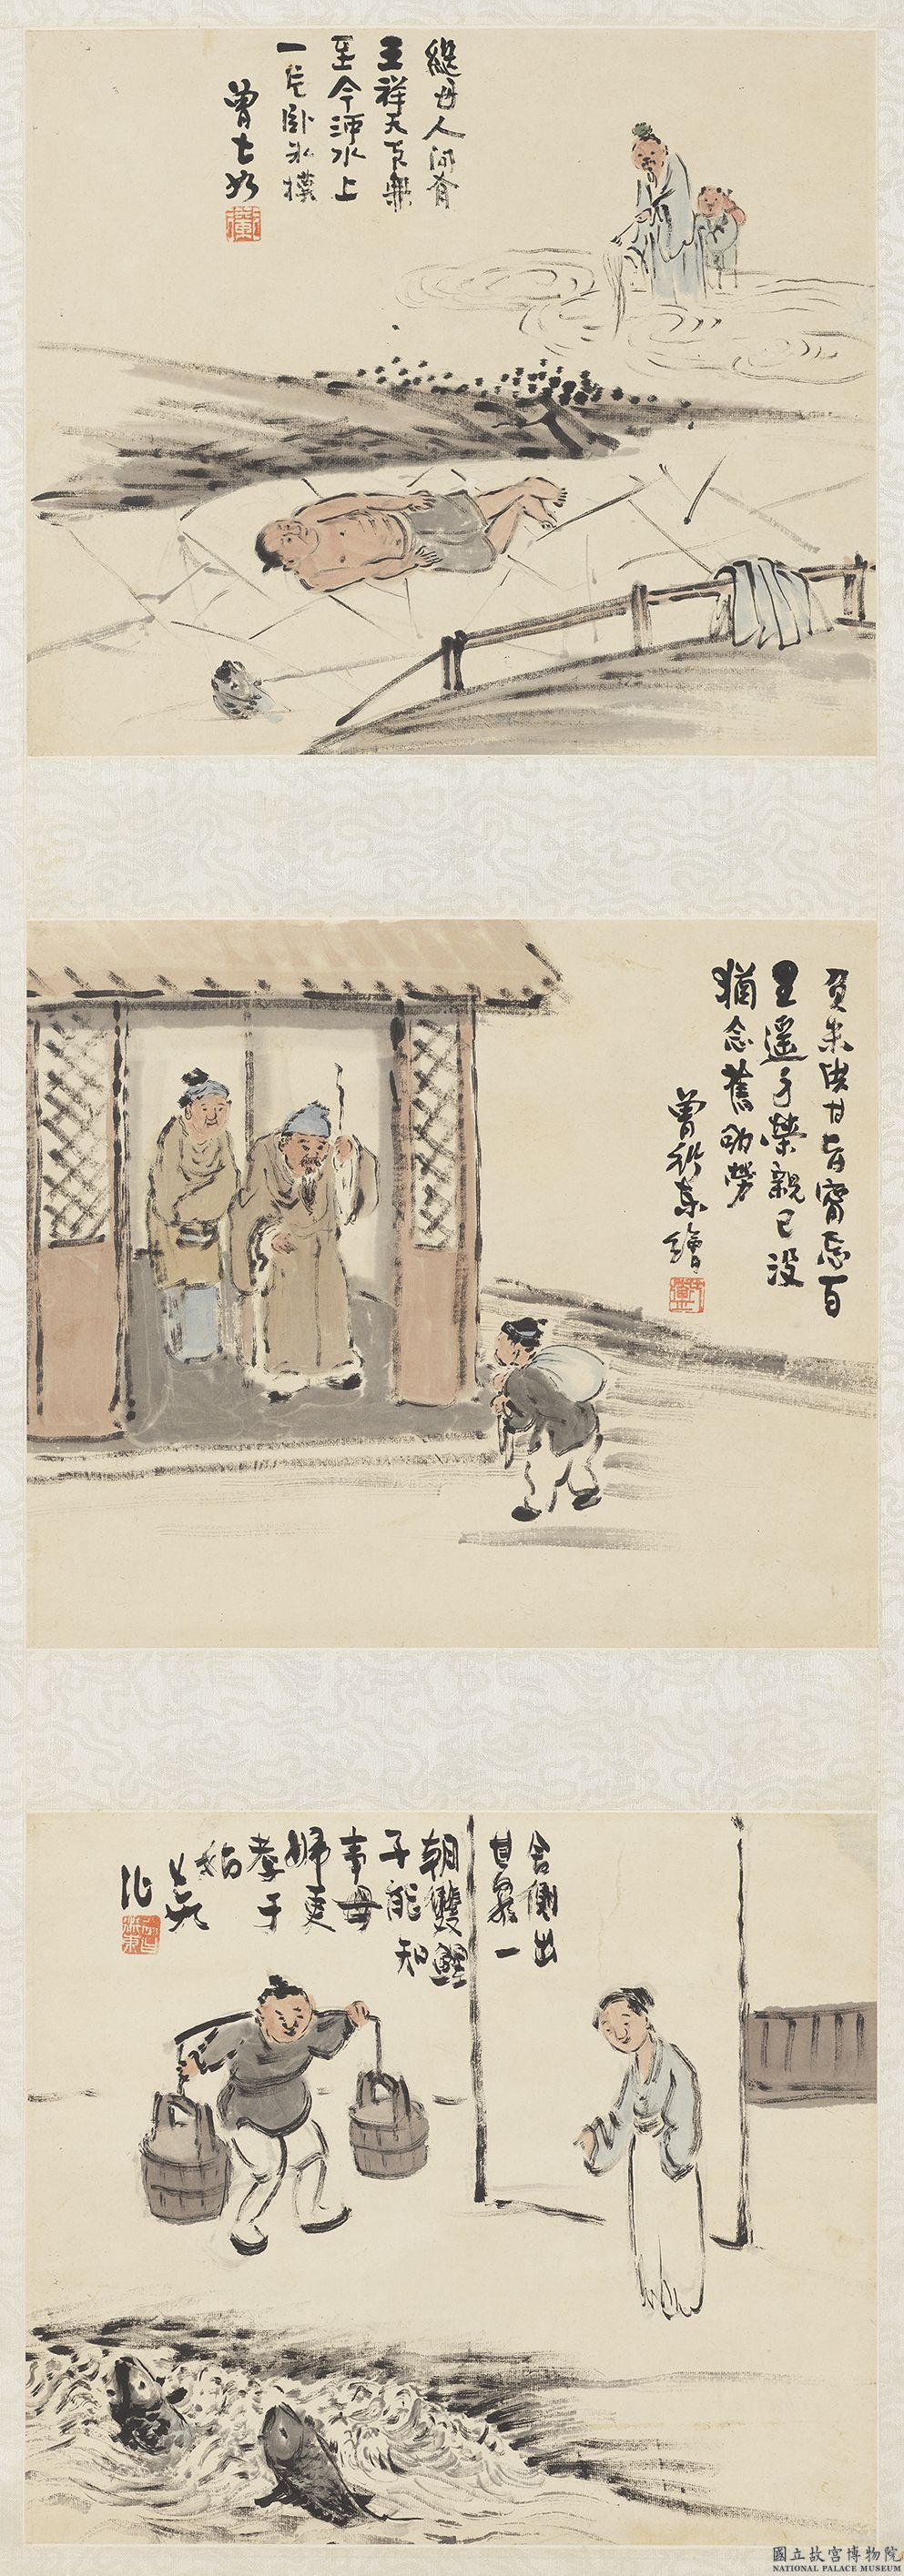 Eight Panels on the 24 Paragons of Filial Piety